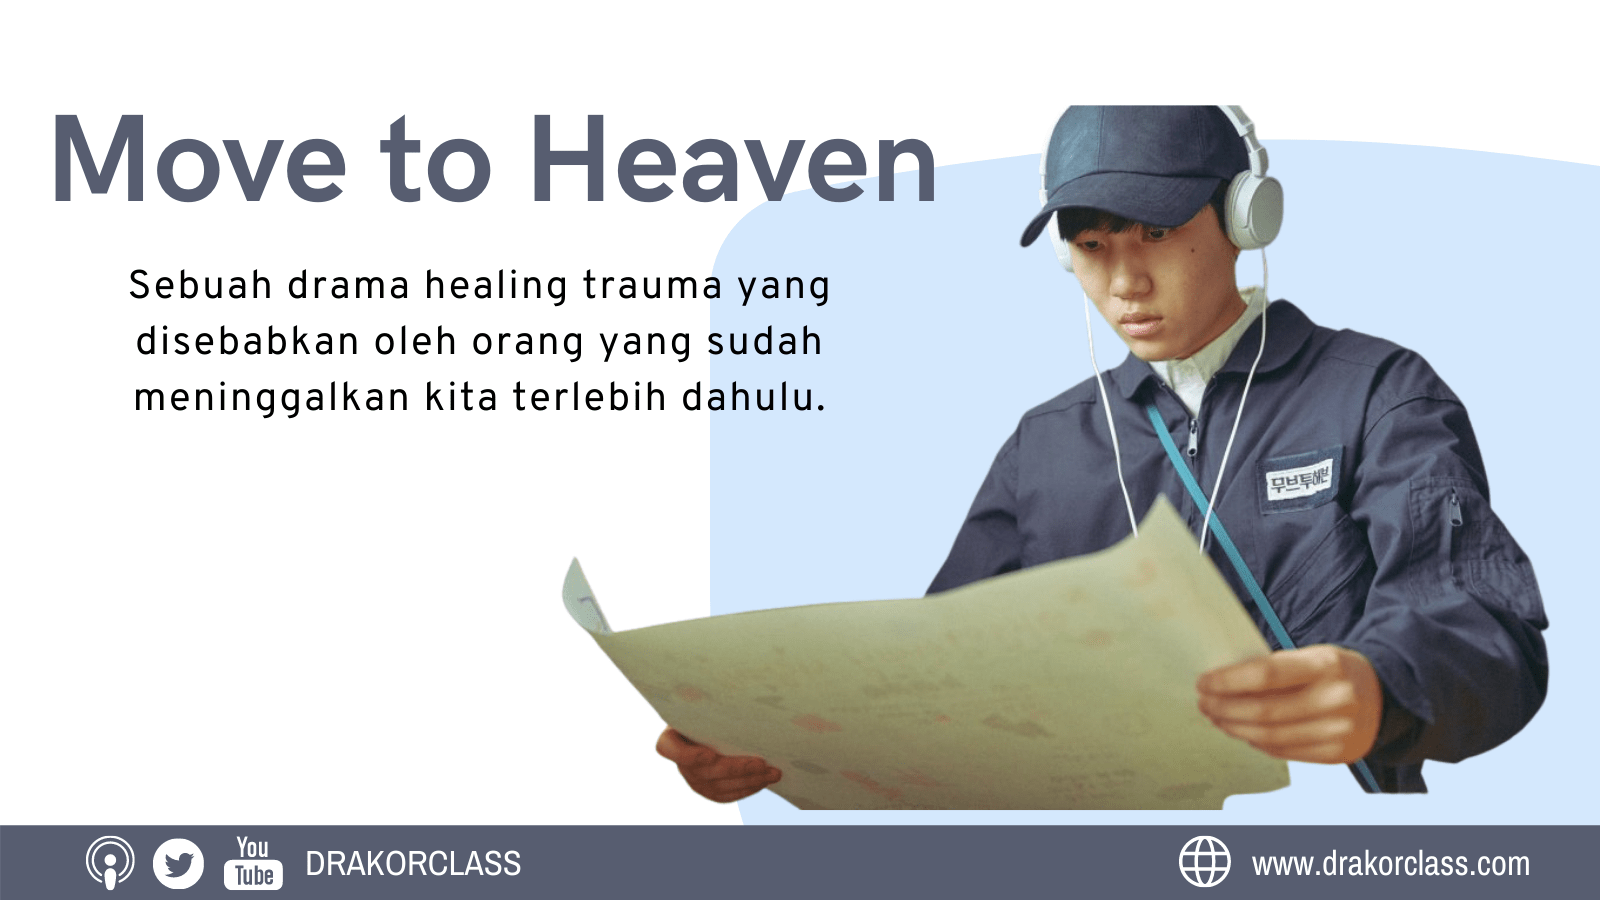 Review drama Move to Heaven